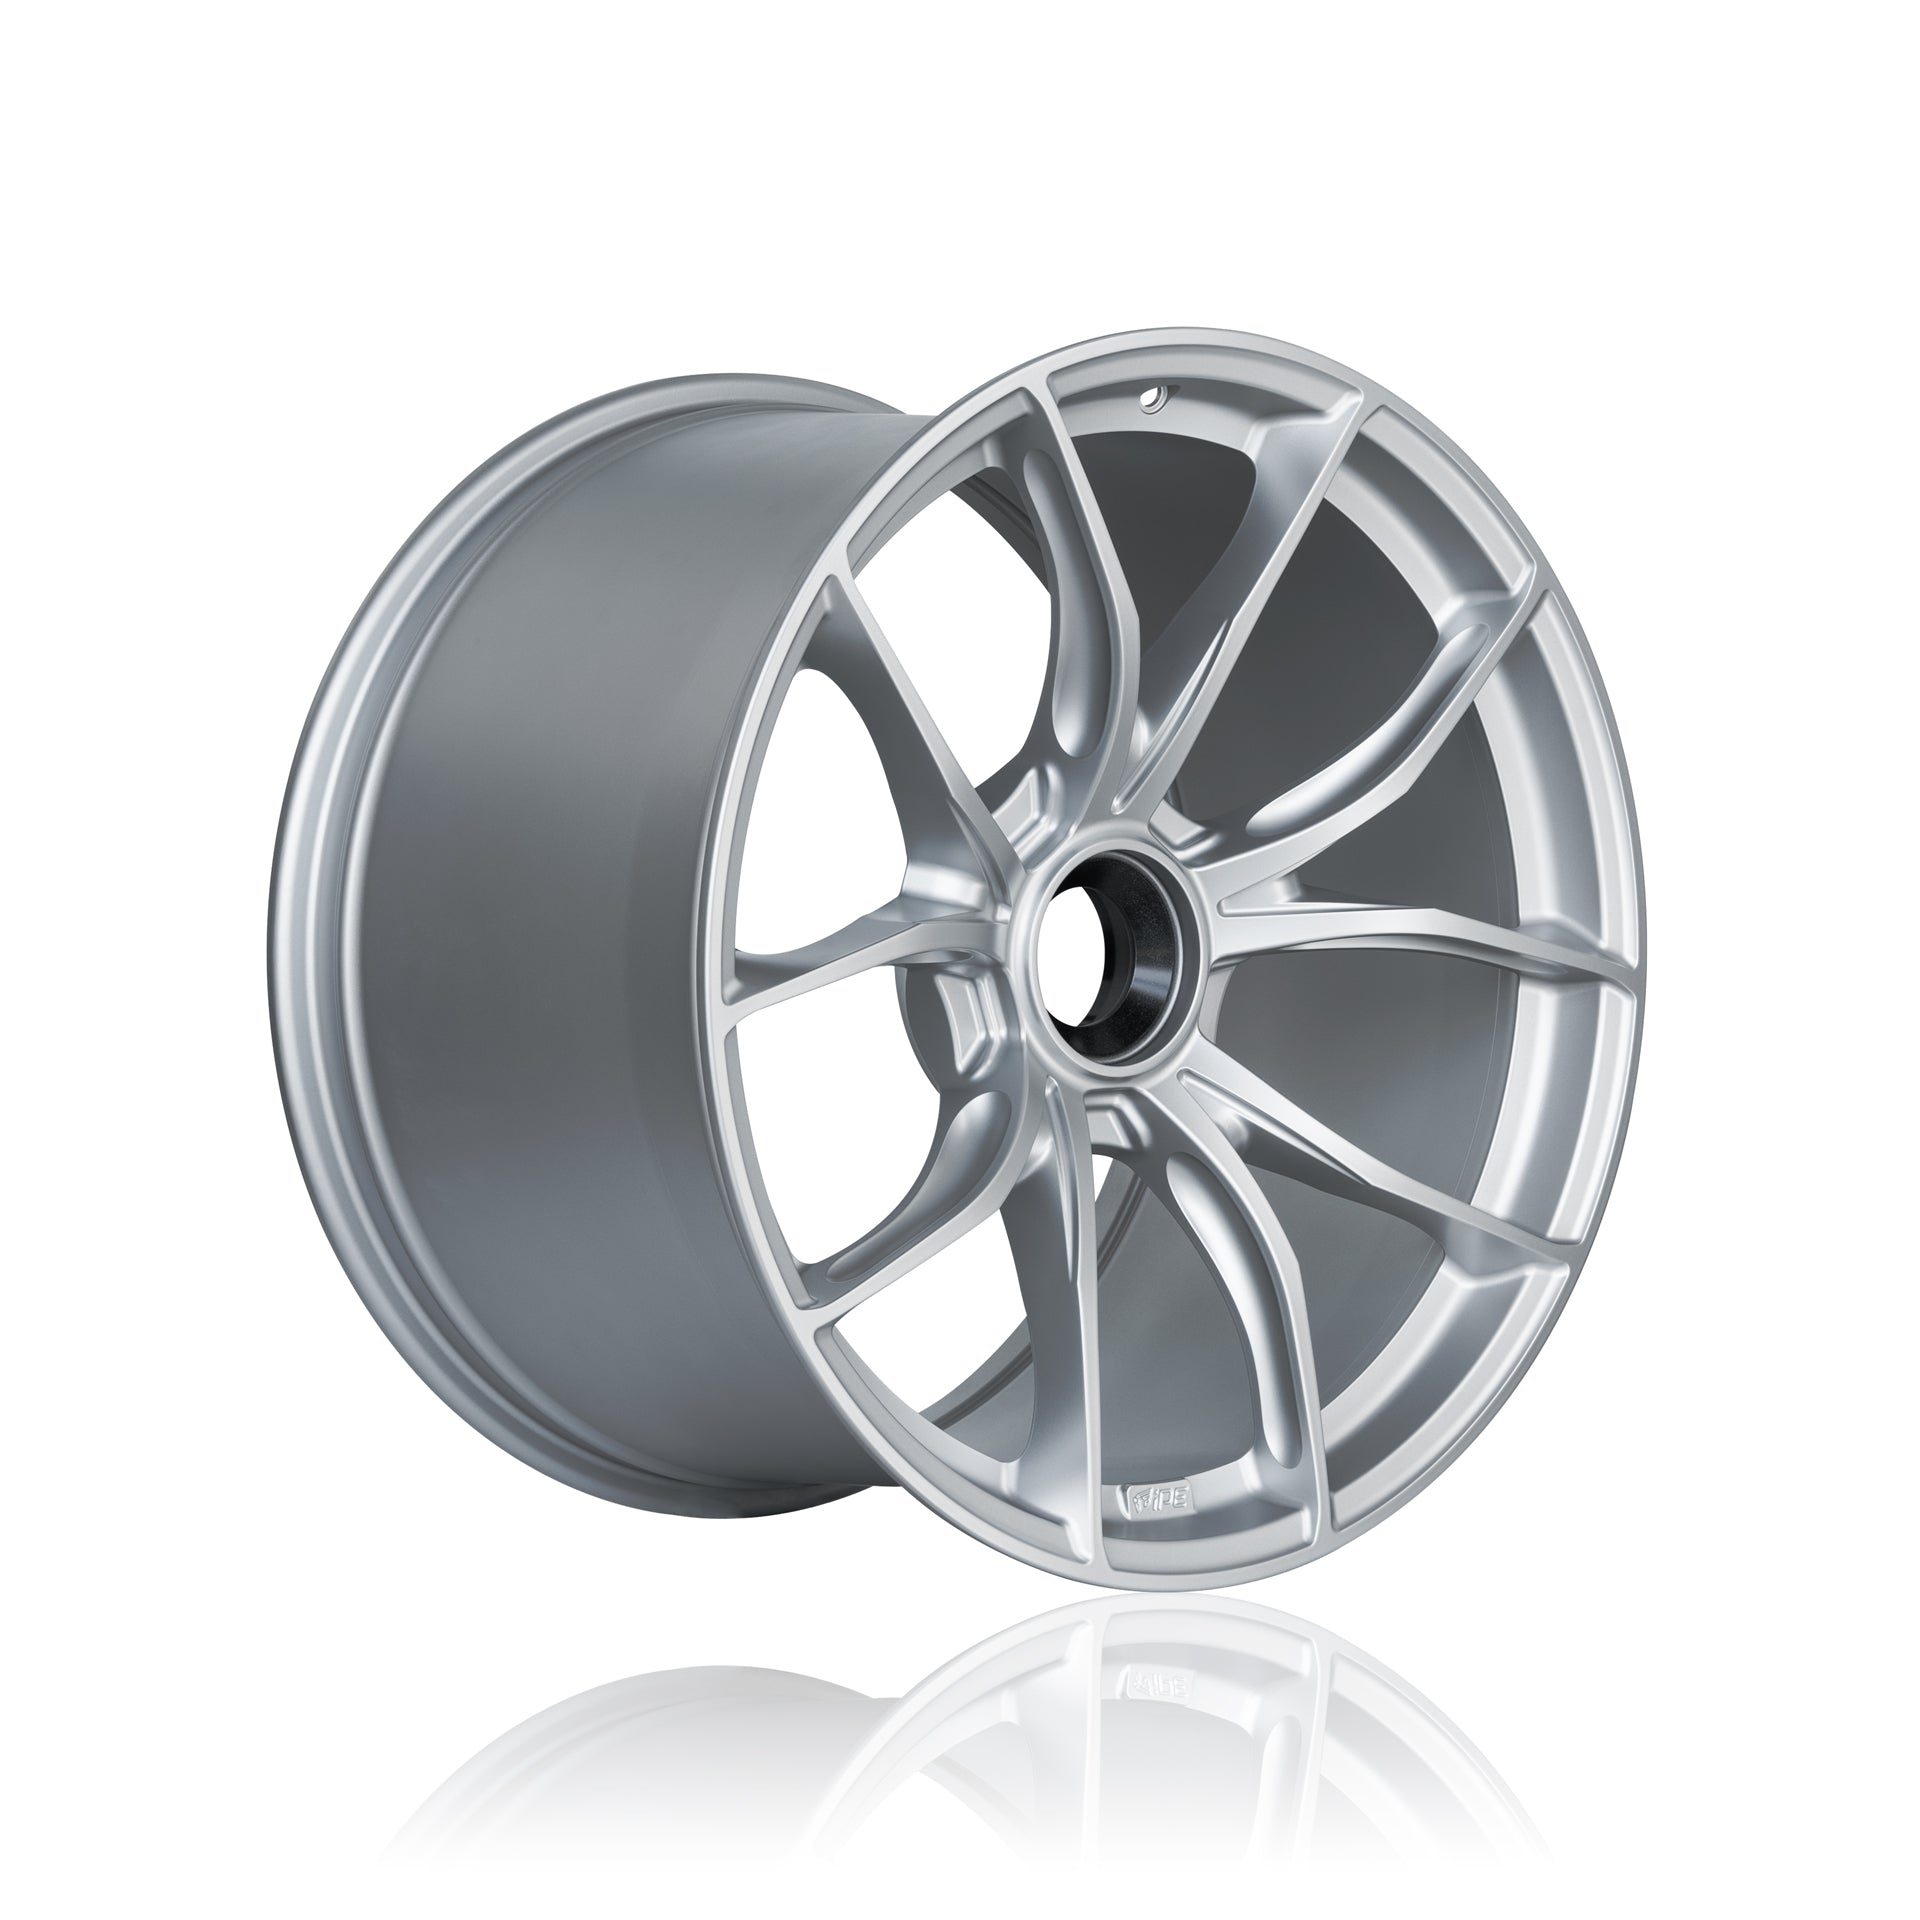 Nearside front view of an IPE MFR-01 Magnesium wheel in silver with a multi-spoke design against a white background